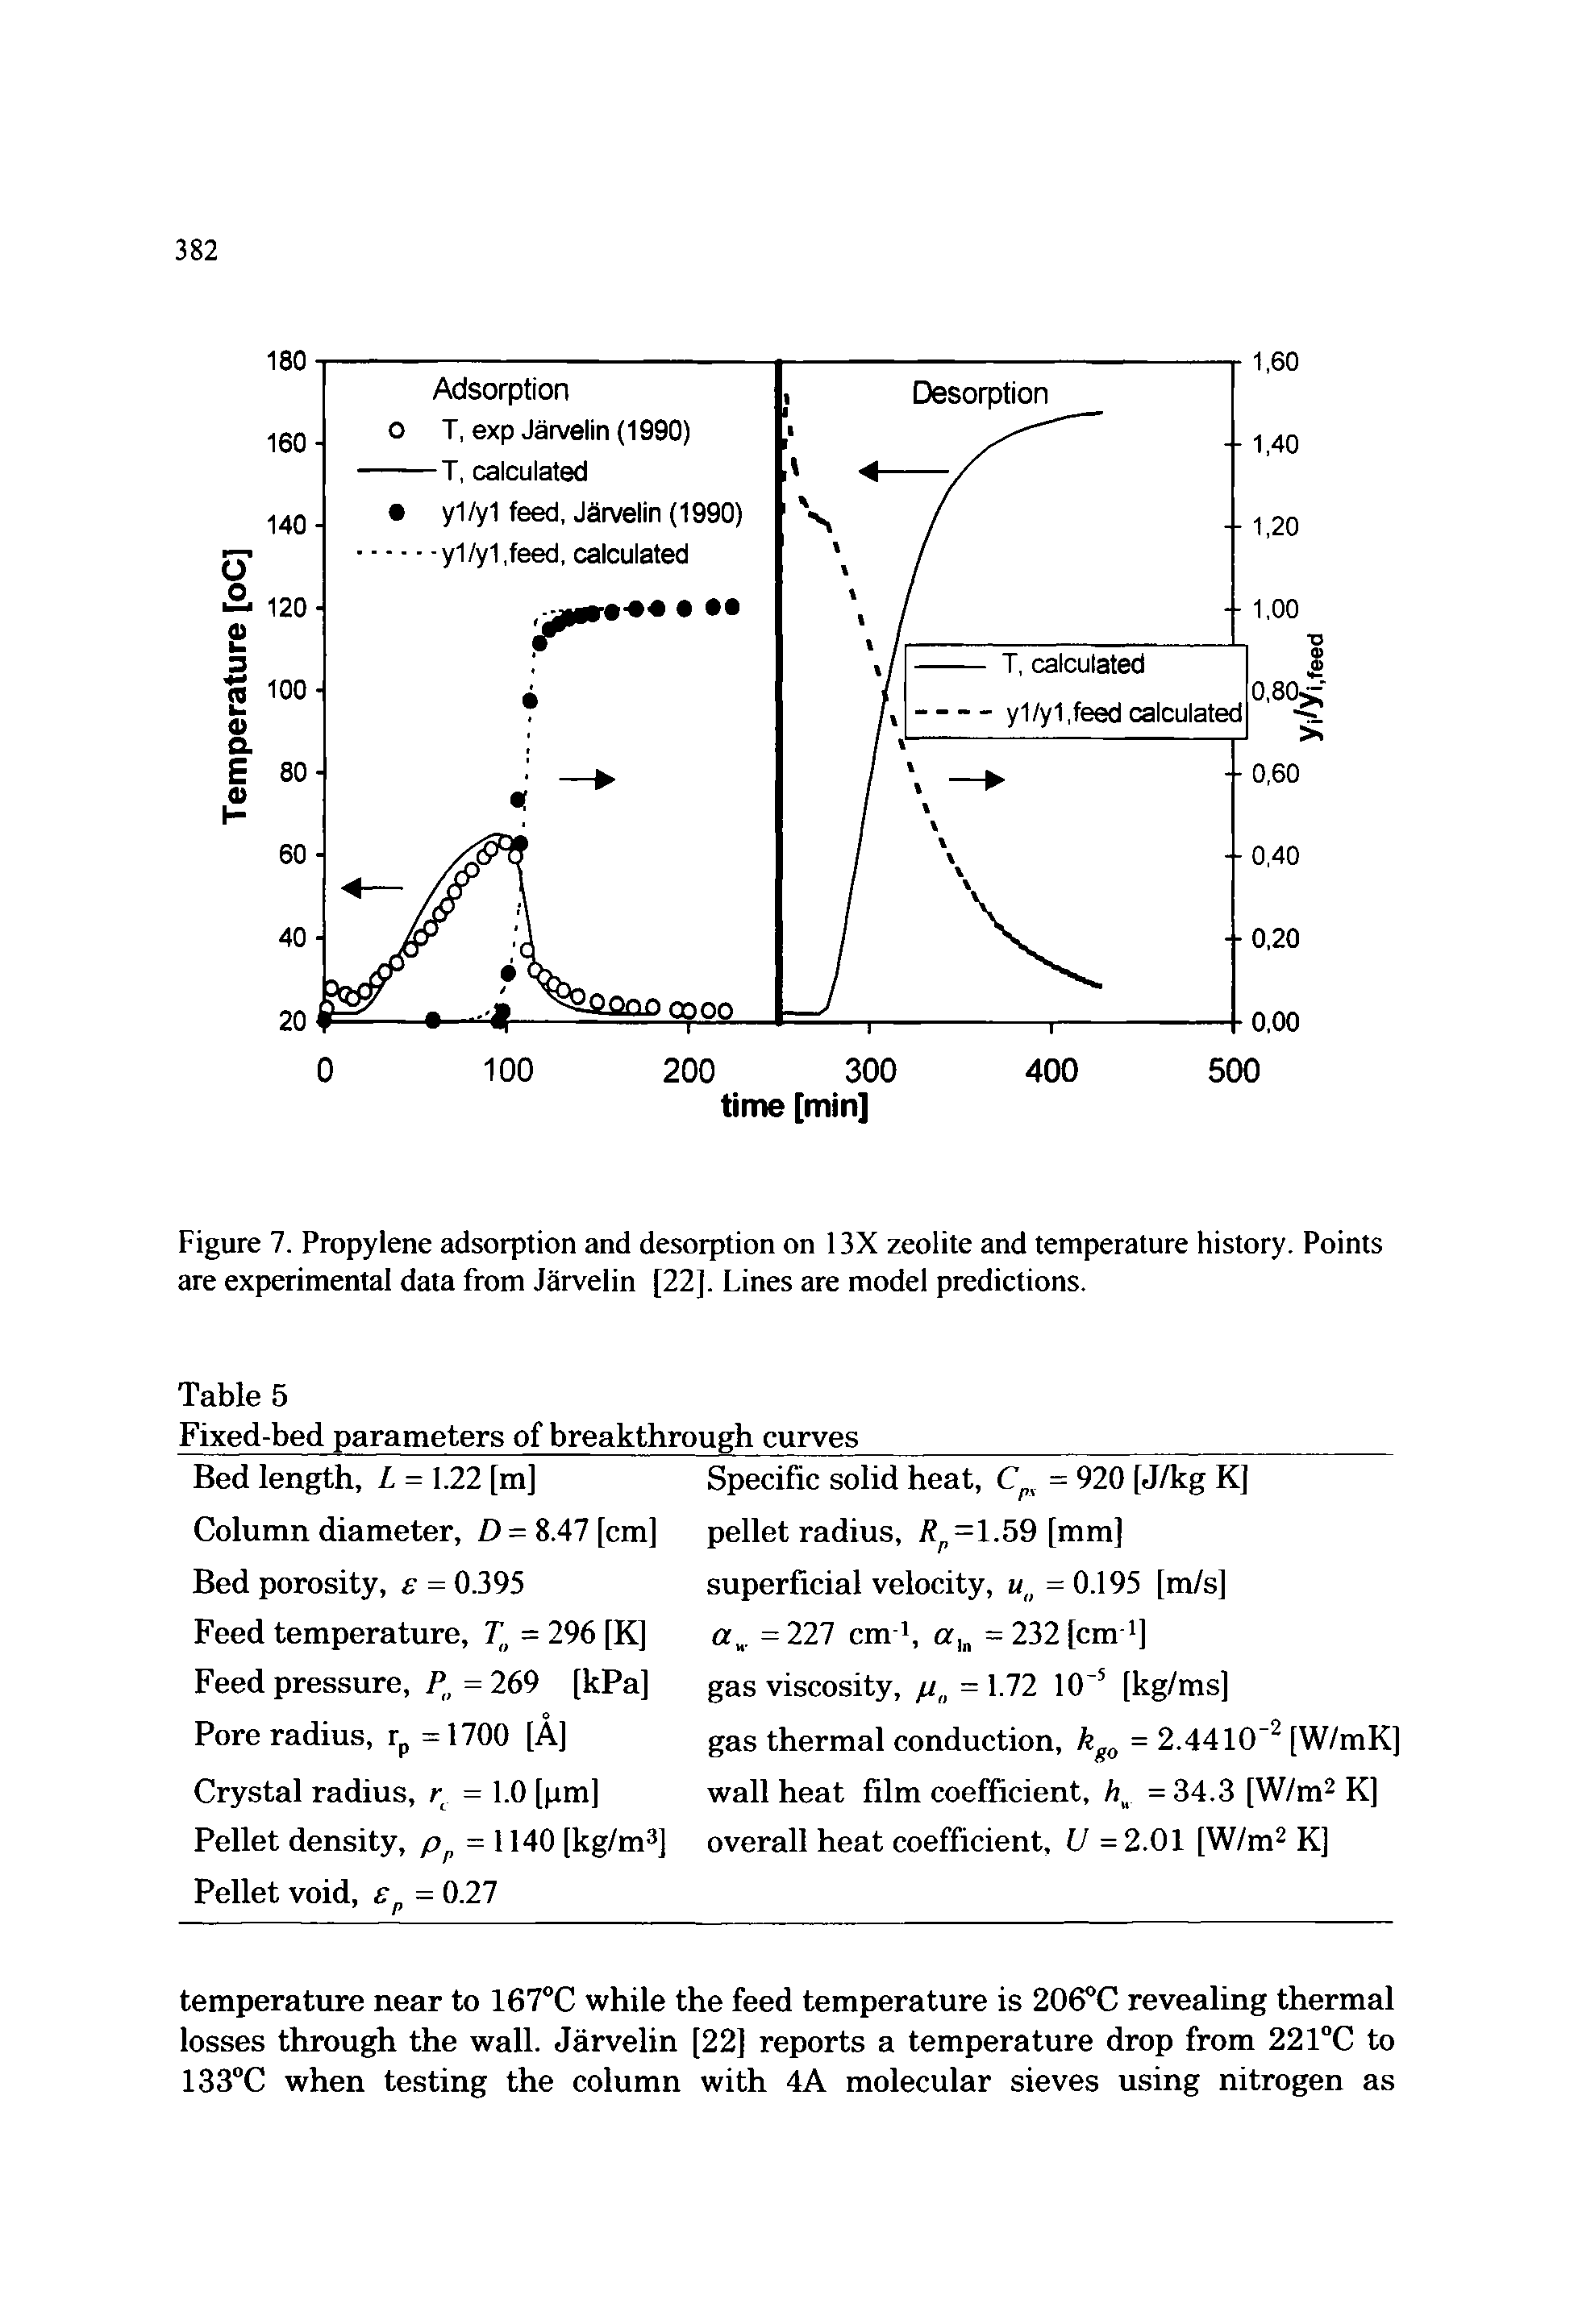 Figure 7. Propylene adsorption and desorption on 13X zeolite and temperature history. Points are experimental data from Jarvelin [22]. Lines are model predictions.